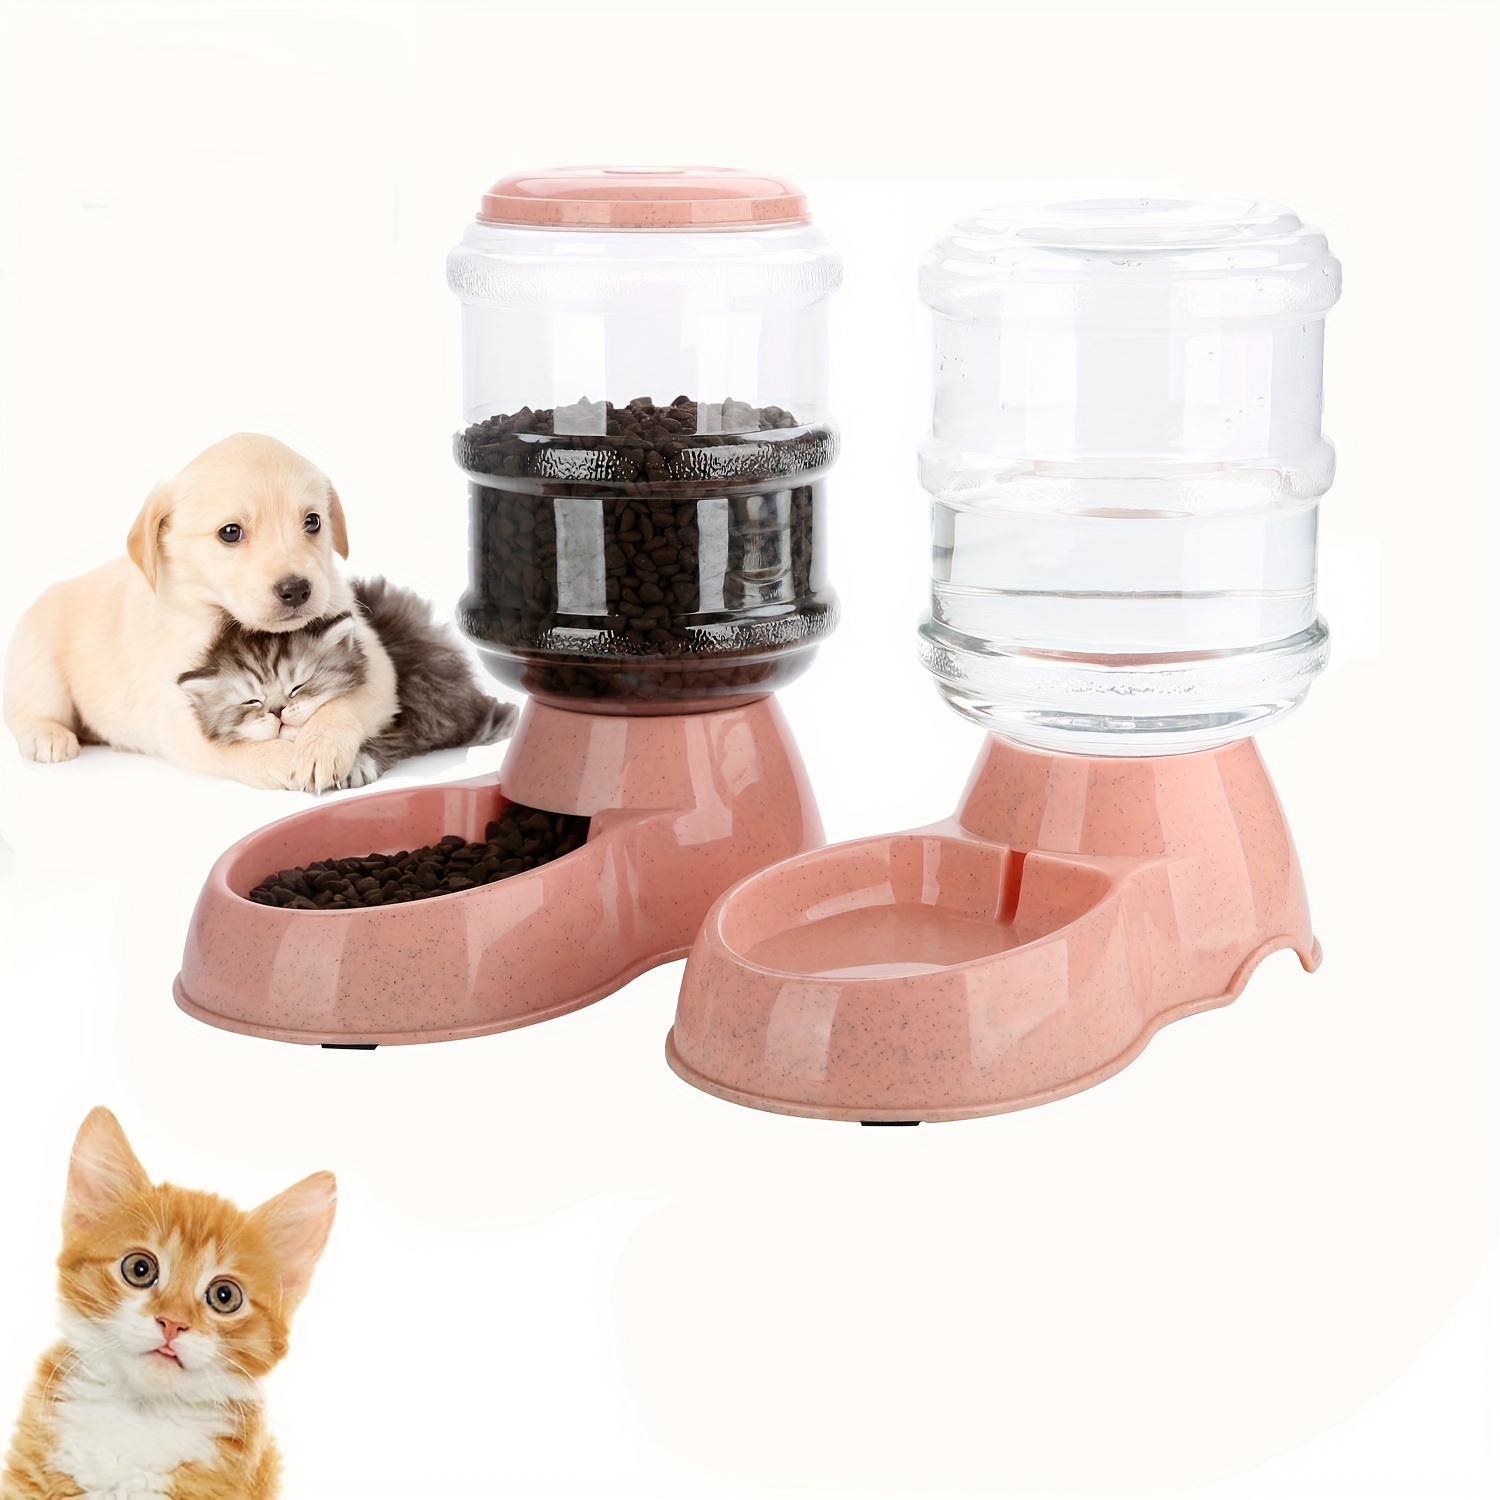 

1pc/2pcs 3.8l Automatic Cat Feeder And Water Dispenser, Gravity Food Feeder And Waterer Set, Pet Food Bowl For Indoor Cats Kittens